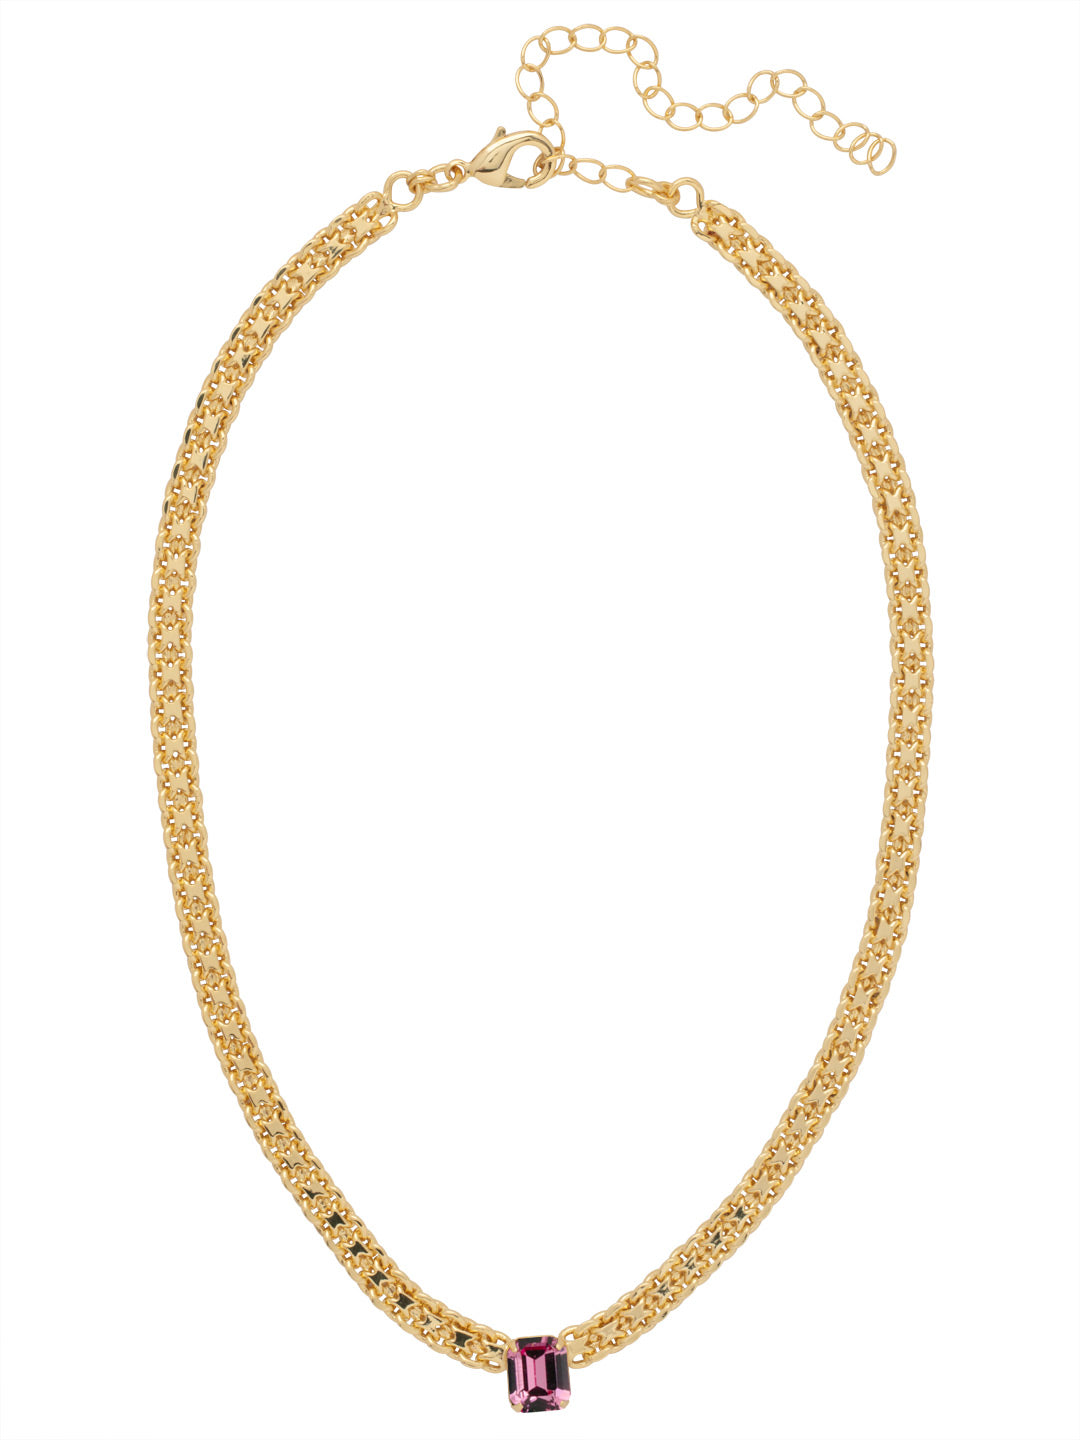 Octavia Tennis Necklace - NFK6BGPPN - <p>The Octavia Tennis Necklace features a single petite emerald cut crystal on an adjustable chain, secured with a lobster claw clasp. From Sorrelli's Pink Pineapple collection in our Bright Gold-tone finish.</p>